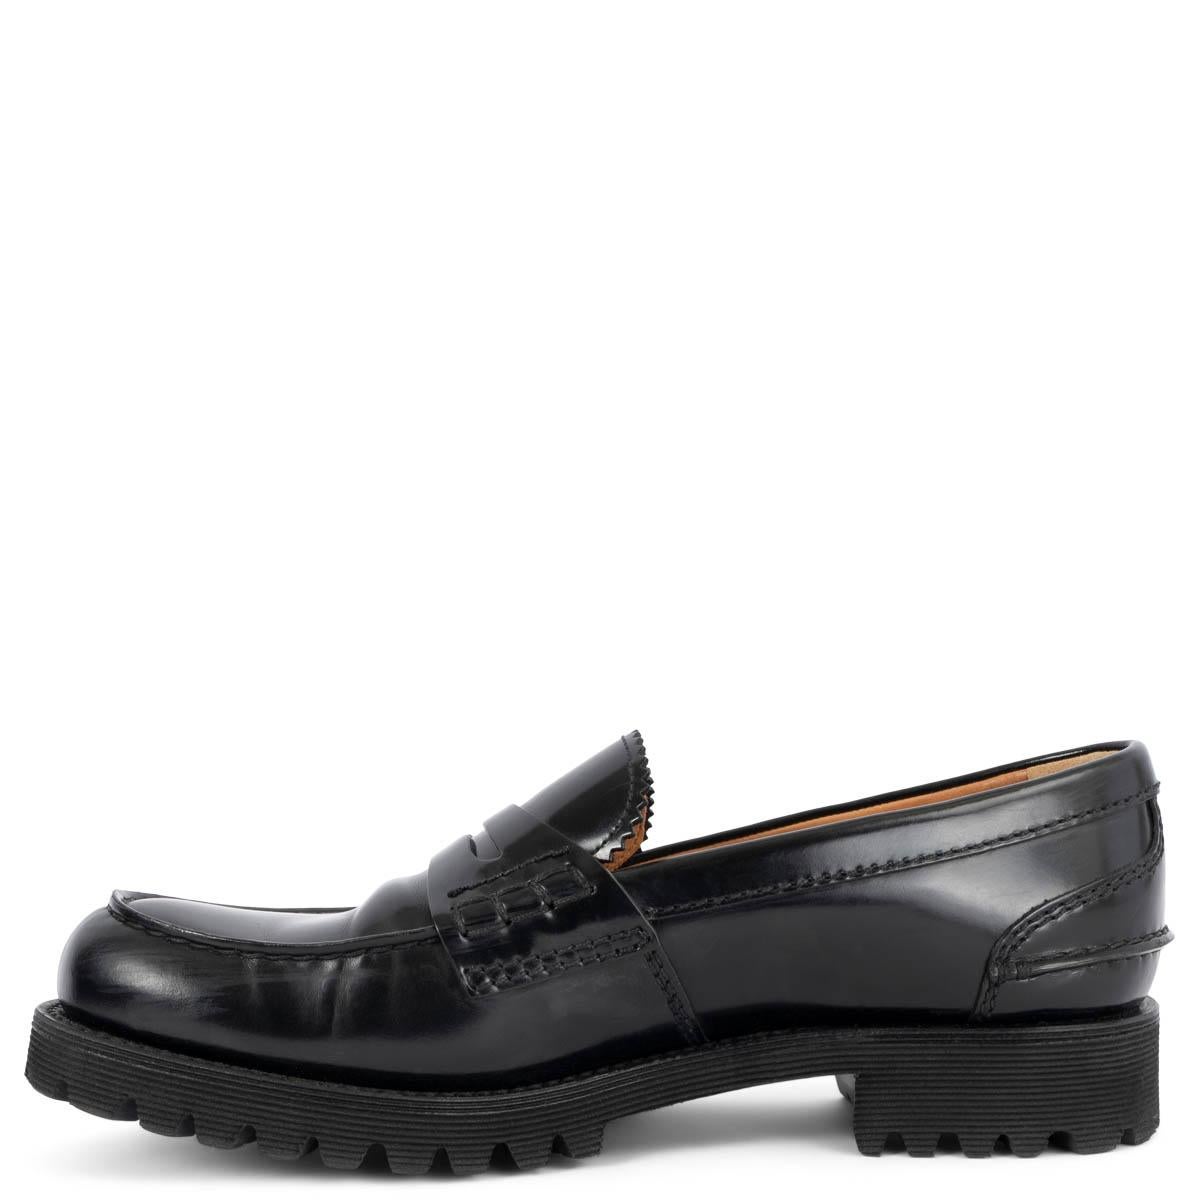 Black CHURCH'S black shiny leather CHUNKY Loafers Flats Shoes 39.5